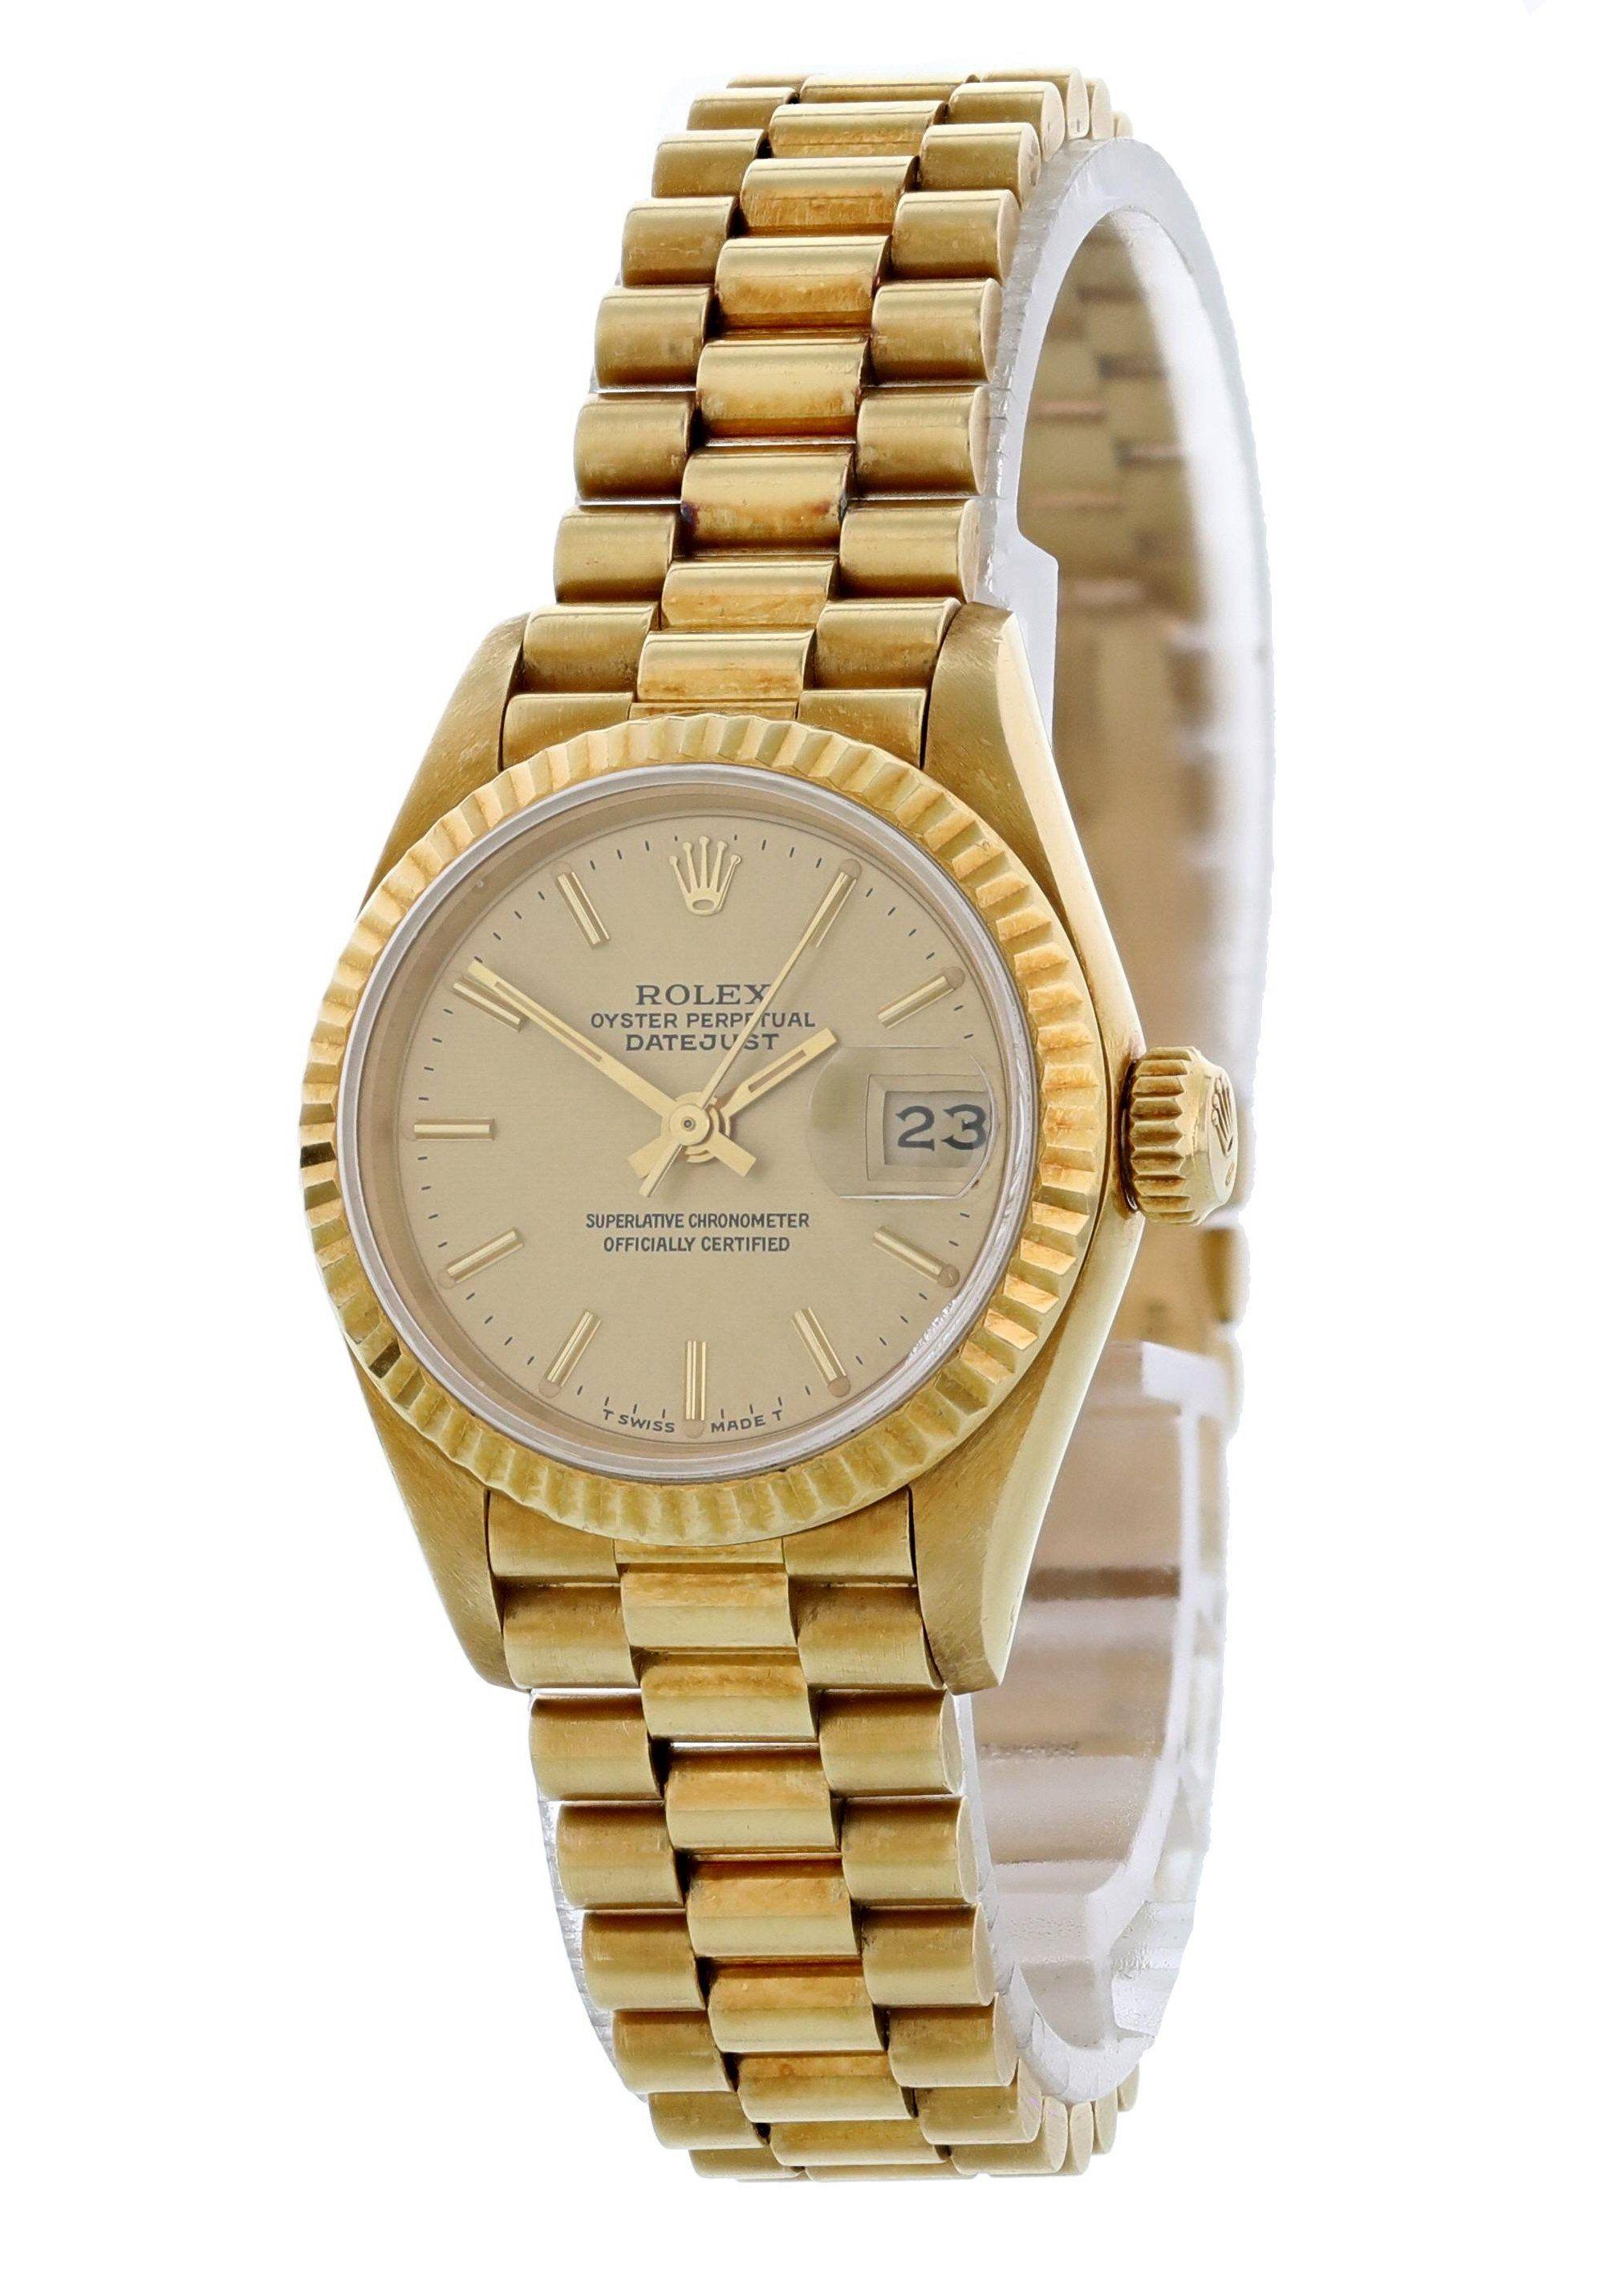 Rolex Datejust 69178 18K Yellow Gold Ladies Watch. 26mm 18K yellow gold case with a fluted bezel. Champagne dial with gold hands and gold tone indexes hour markers.  Quickset date display at 3 o'clock position. 18K yellow gold bracelet with 18K